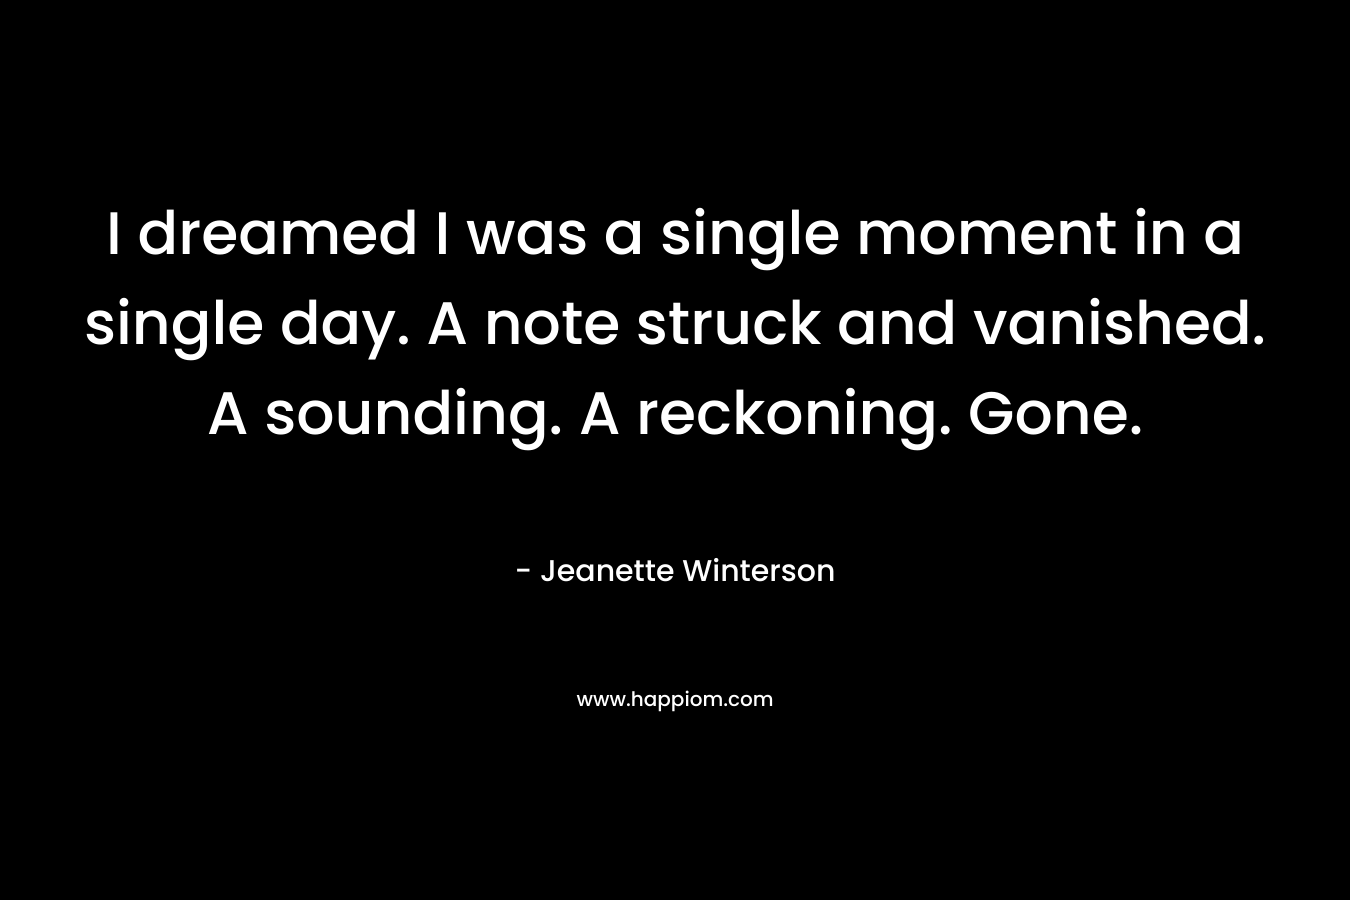 I dreamed I was a single moment in a single day. A note struck and vanished. A sounding. A reckoning. Gone. – Jeanette Winterson